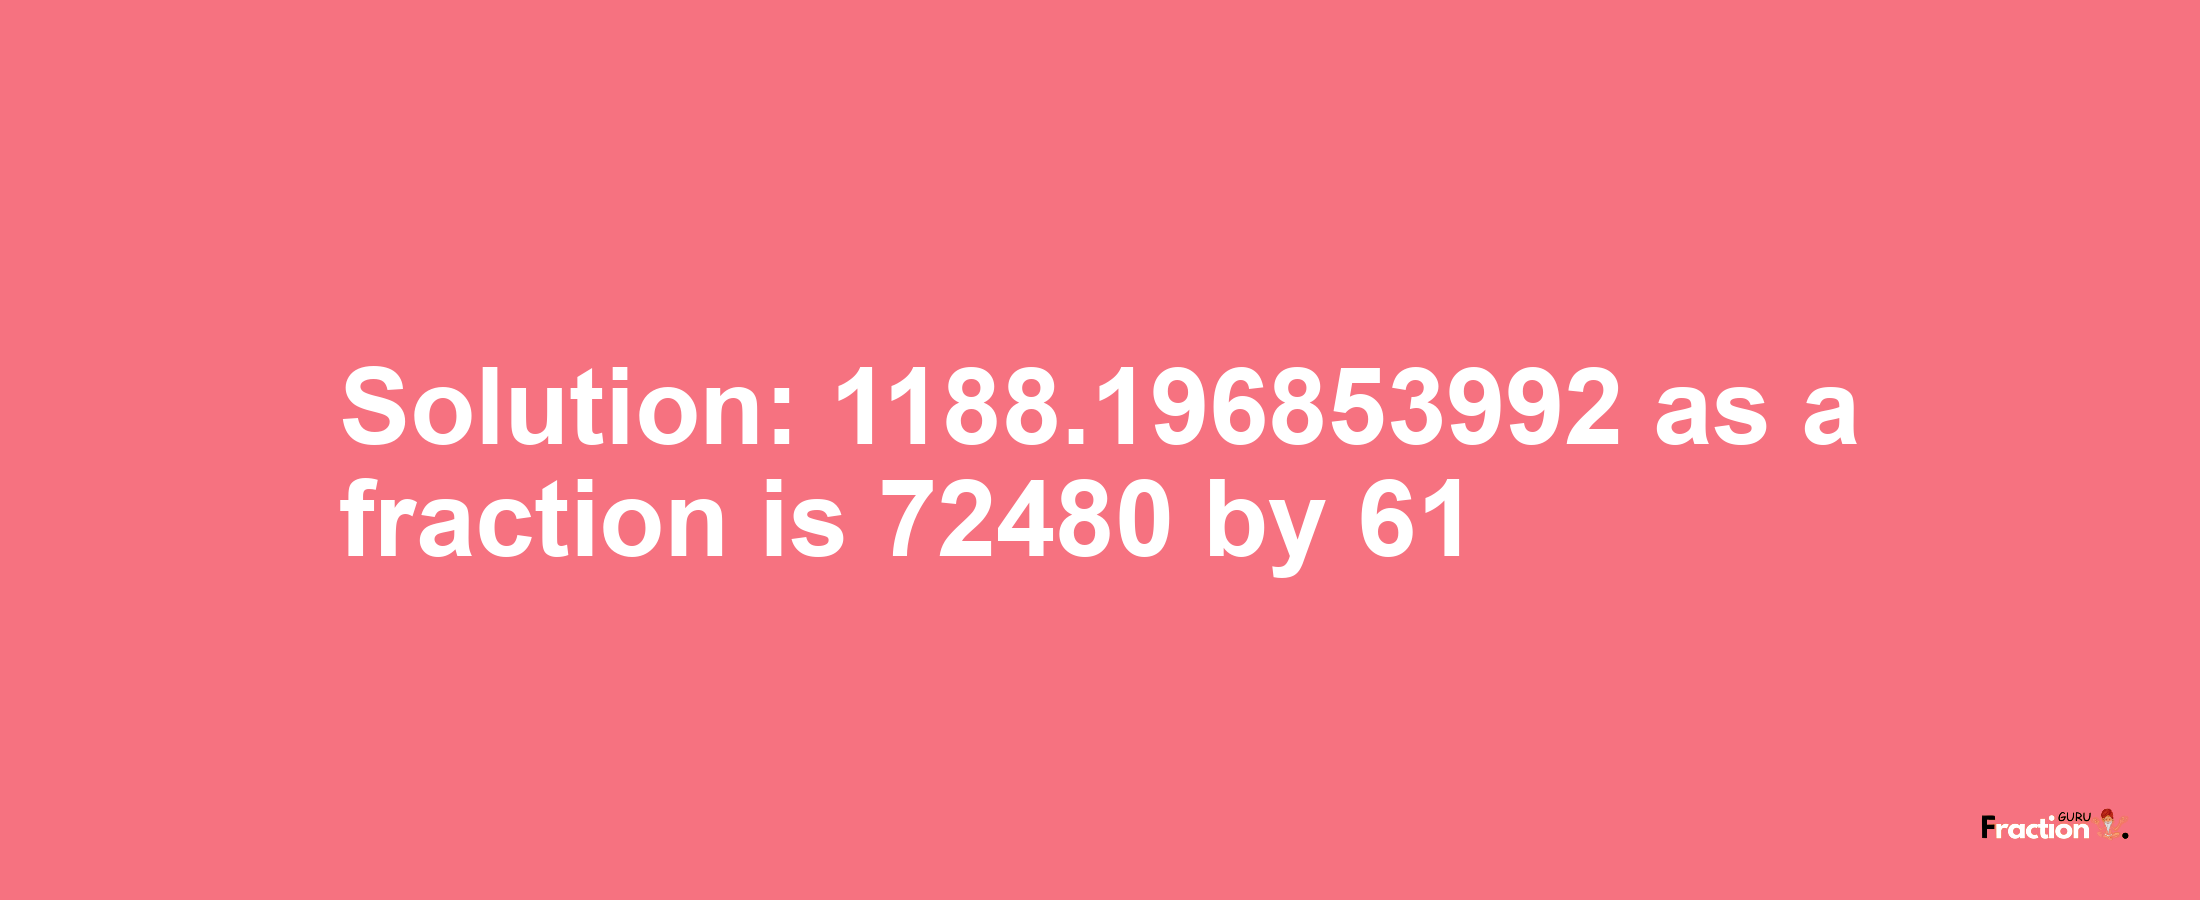 Solution:1188.196853992 as a fraction is 72480/61